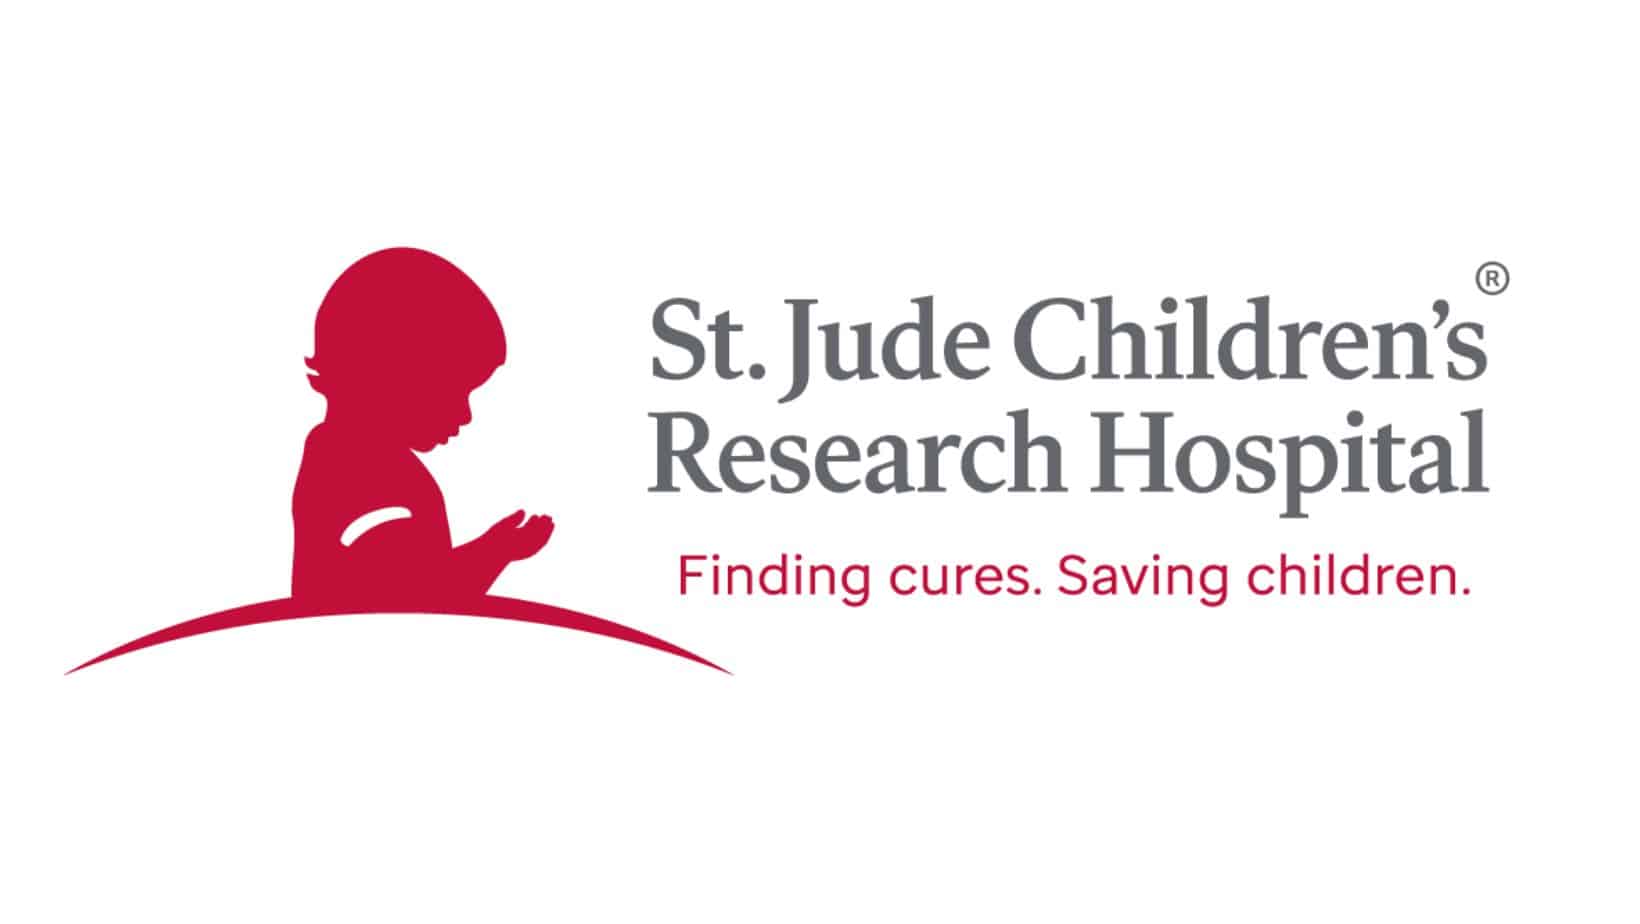 St. Jude Children's Research Hospital logo featuring a red silhouette of a child praying, with the tagline "Finding cures. Saving children.